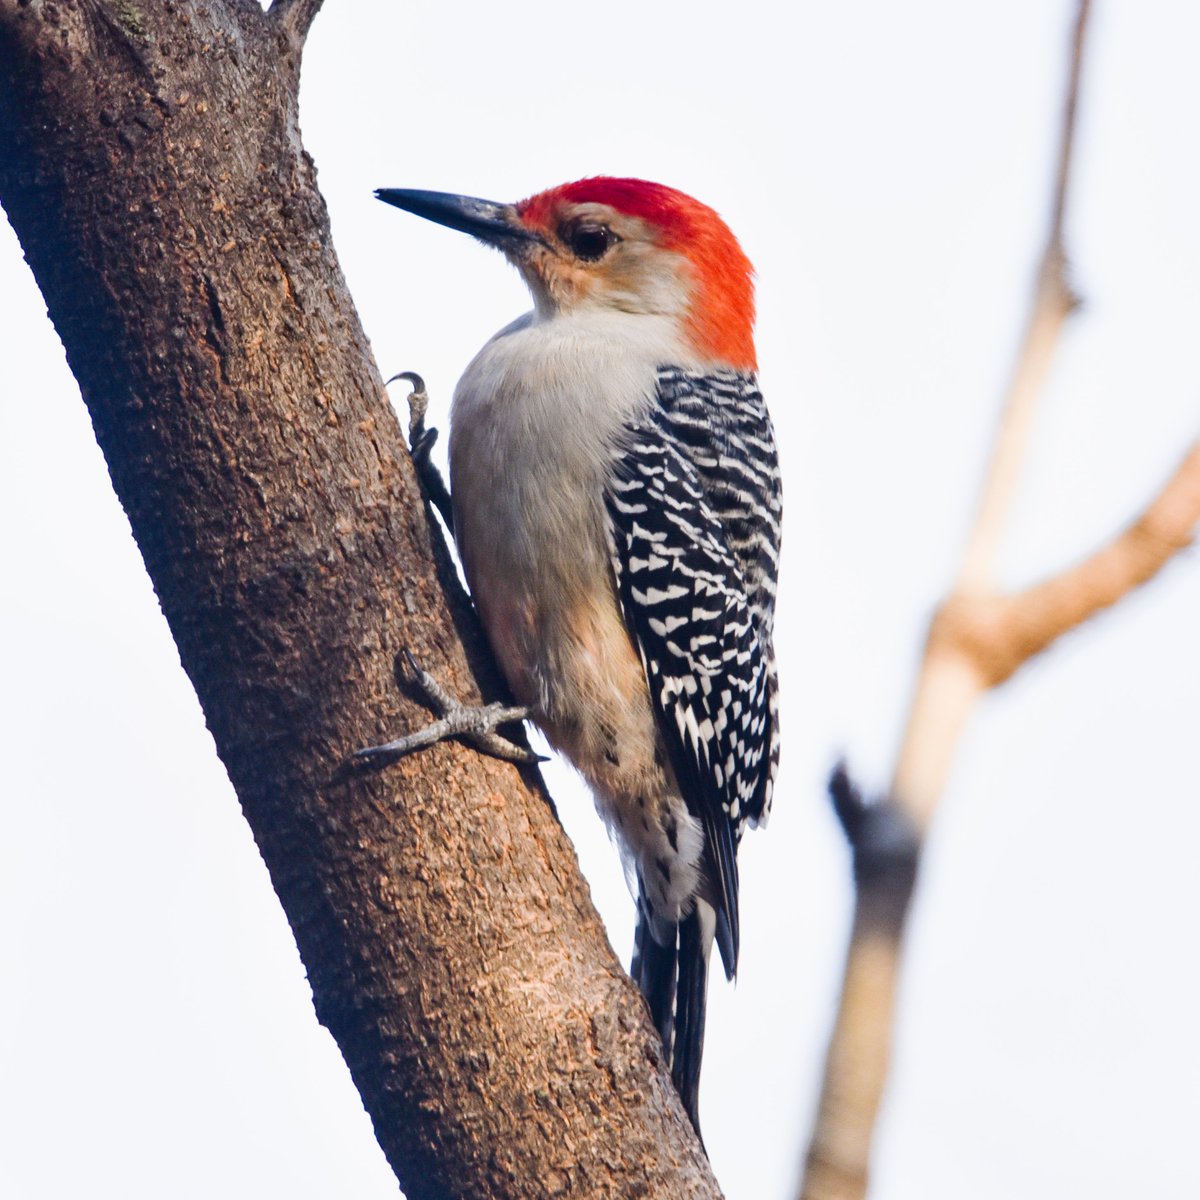 If I had to guess, in the opinion of this Woodpecker, what this tree really needs is a few holes in it. This is further proof that in most any matter it is important to consider the source and remember that we all have our biases and unique viewpoints.

#redbelliedwoodpecker